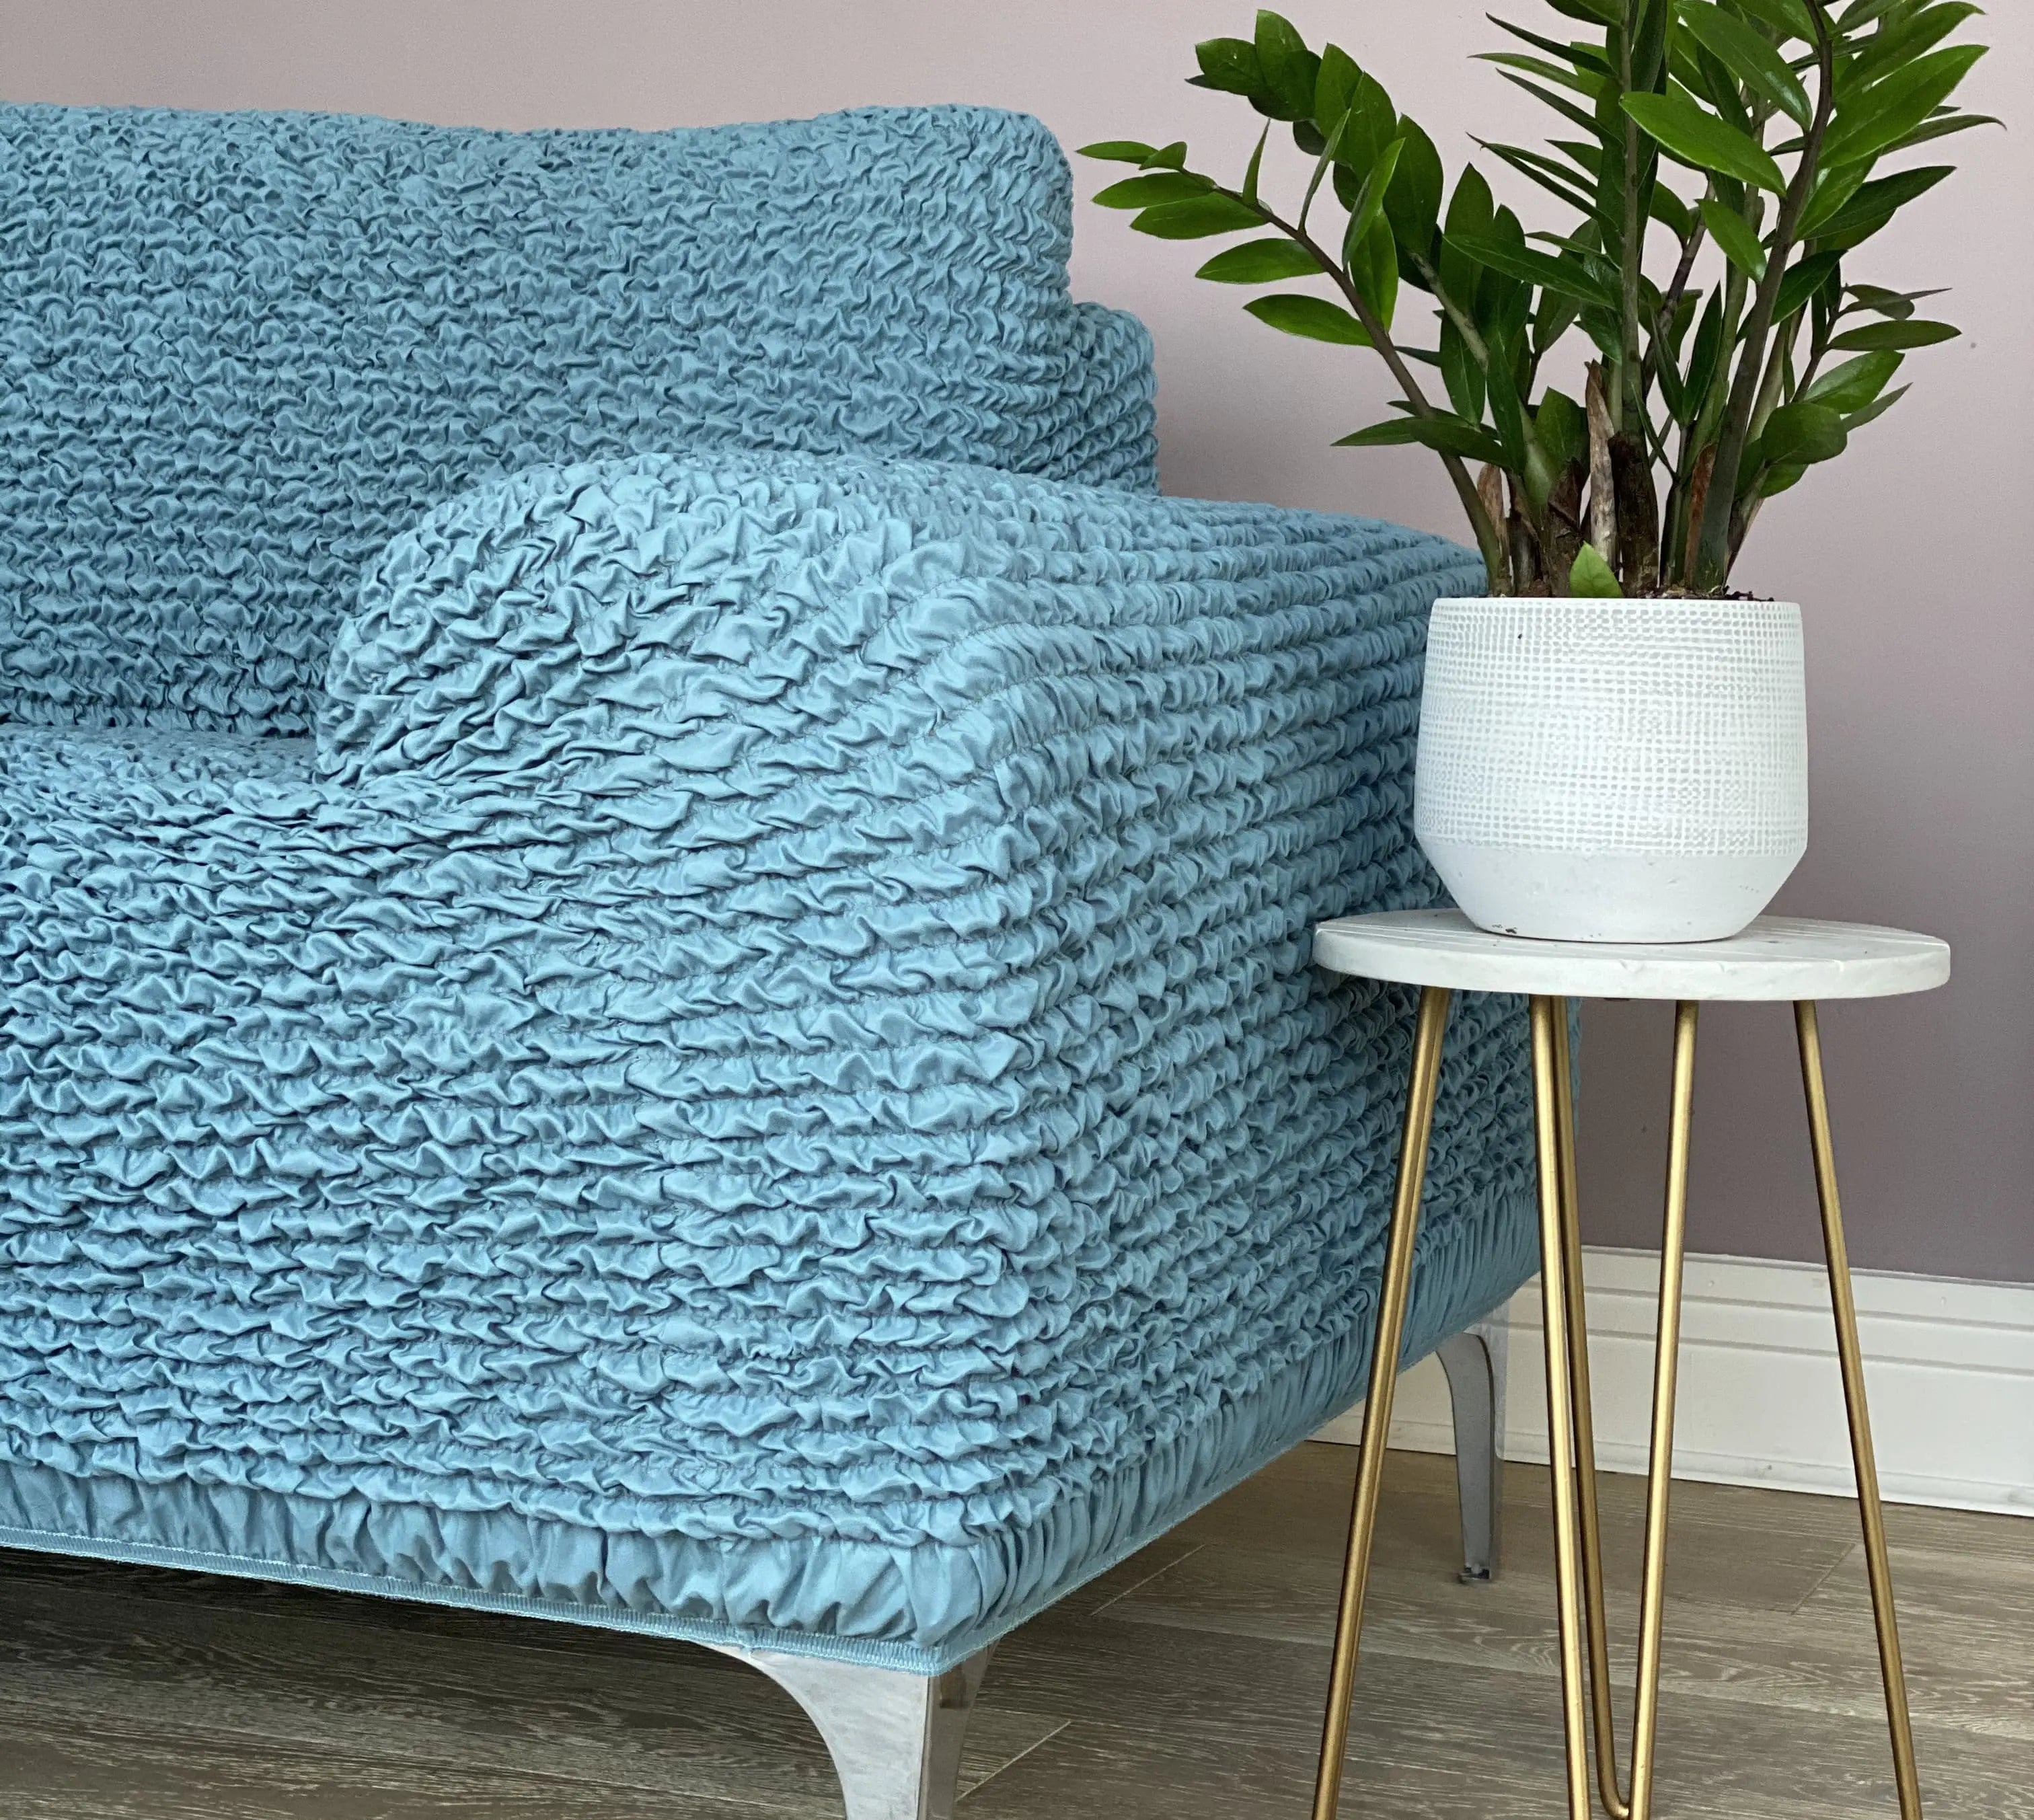 https://cdn.shopify.com/s/files/1/0553/8044/3310/files/Why_Should_You_Get_a_Couch_Cover__1.webp?v=1694074549